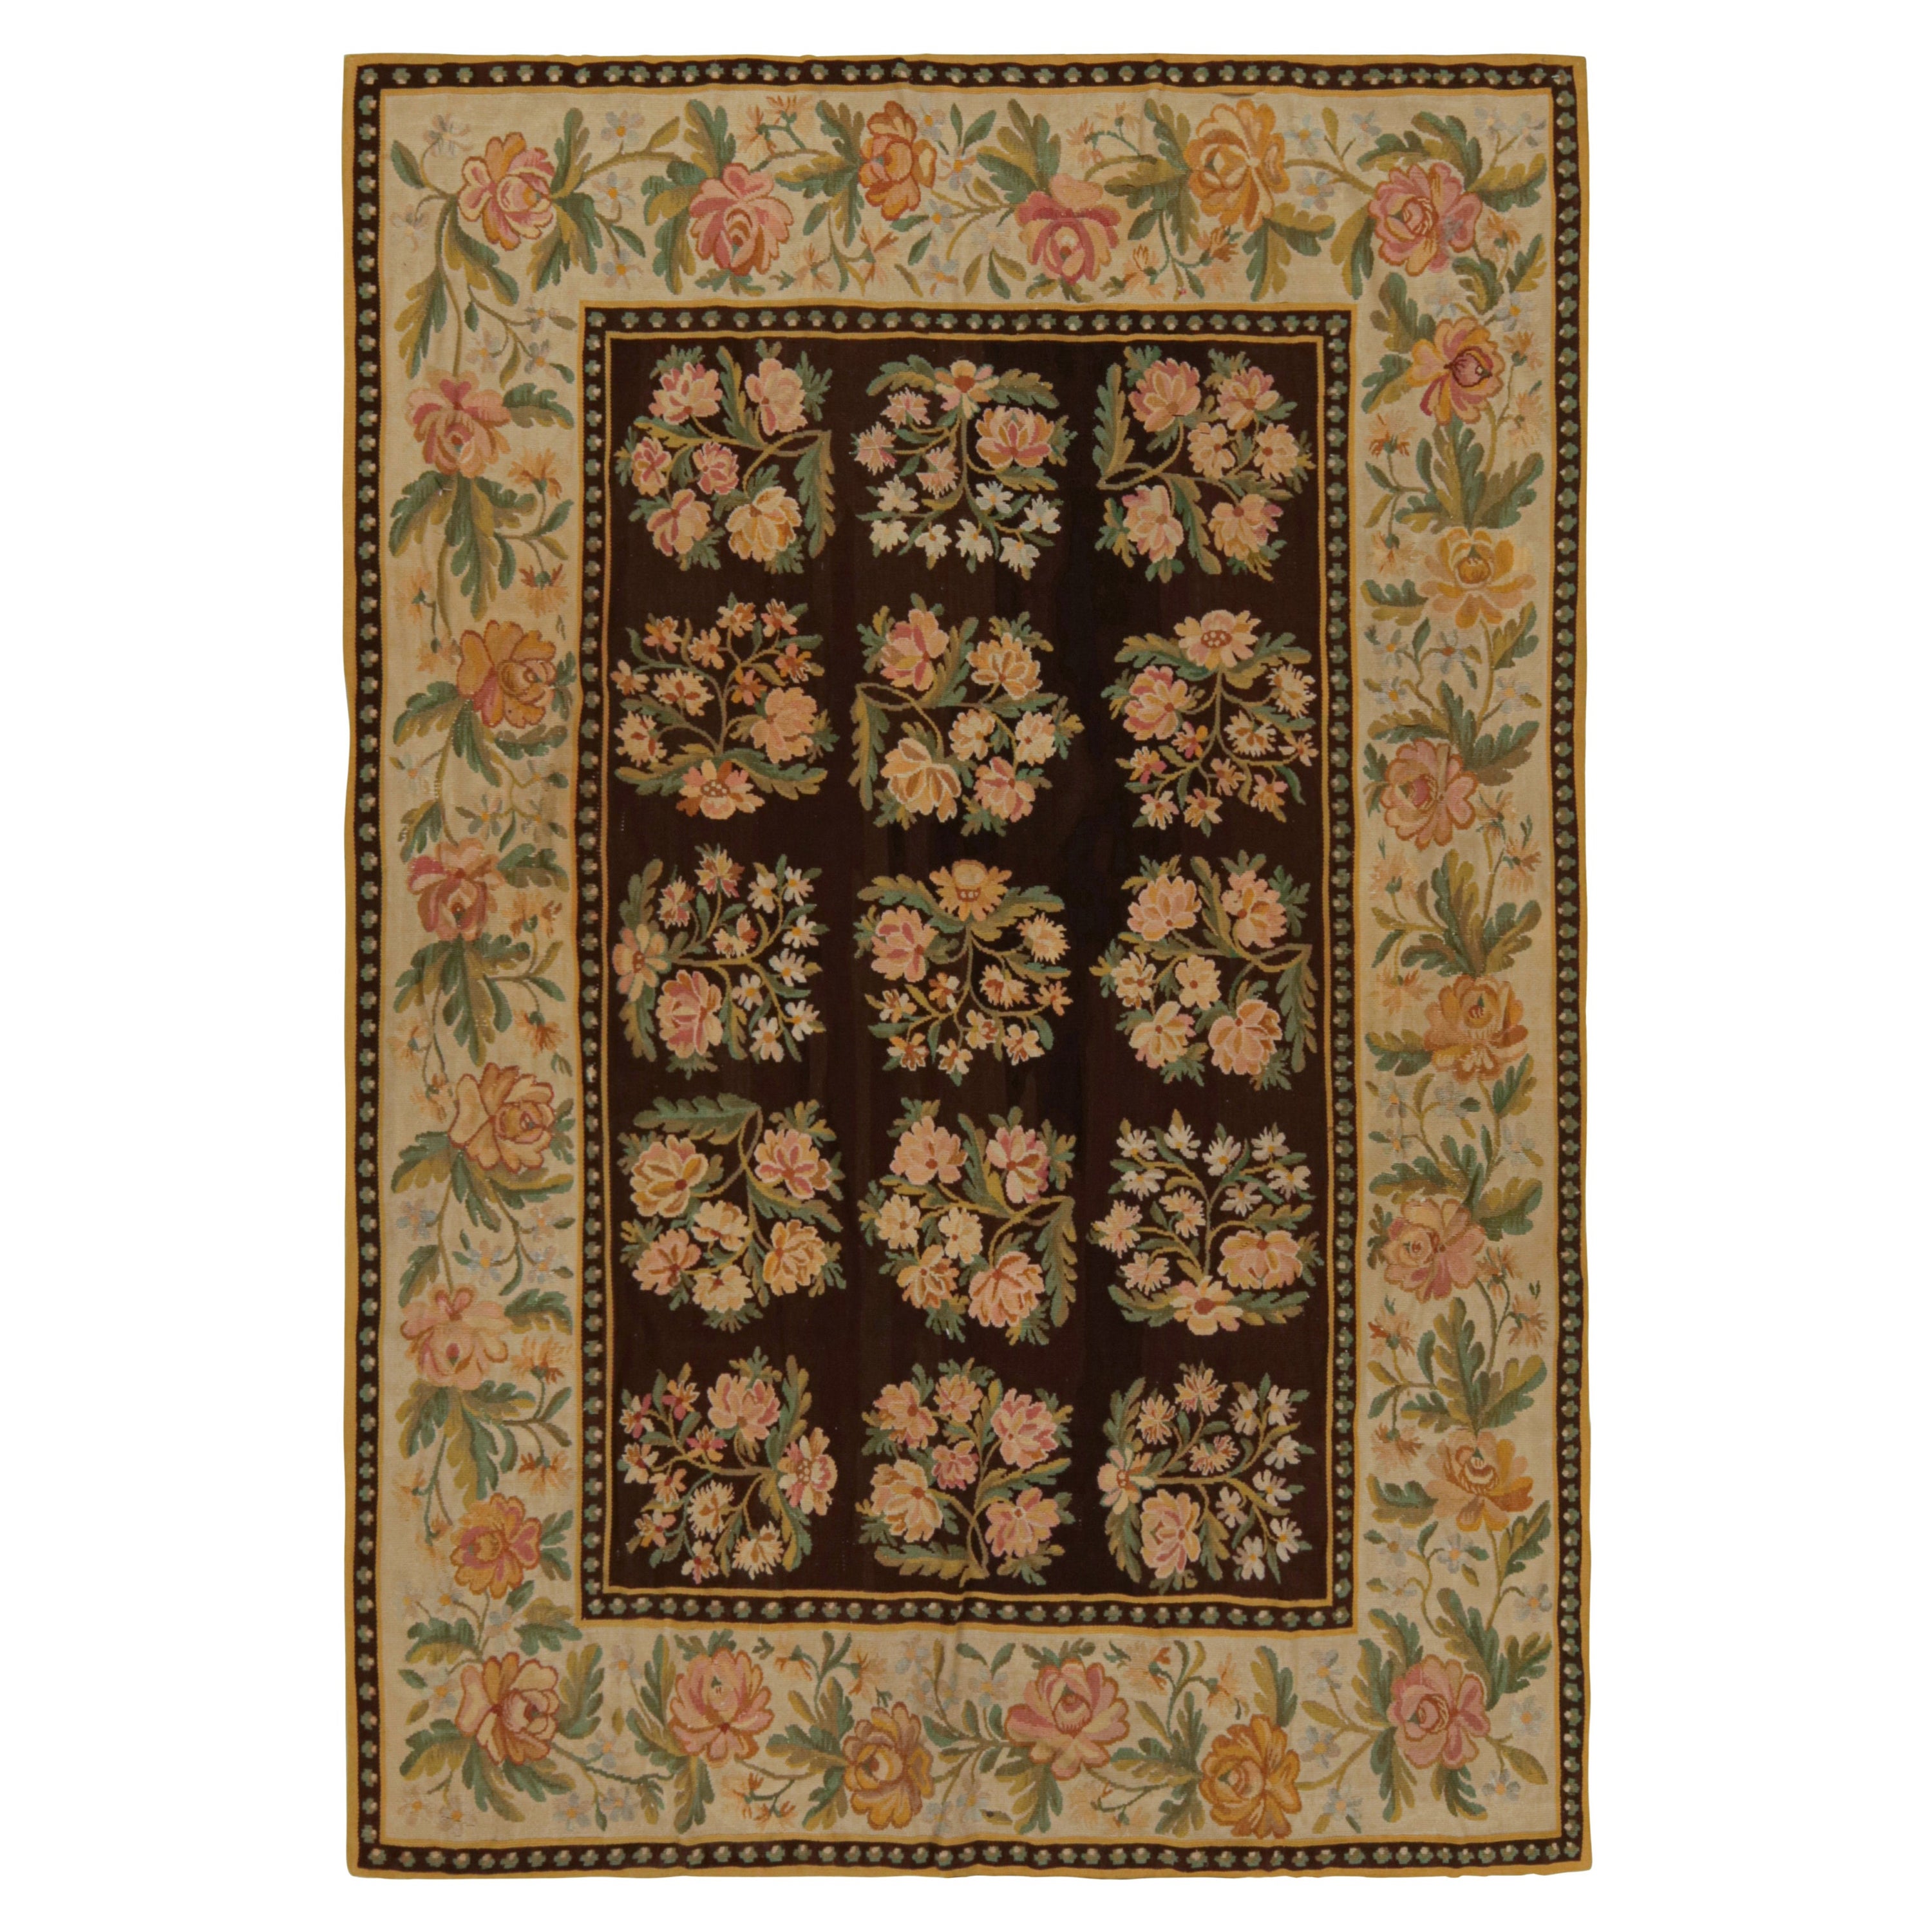 Antique Bessarabian Kilim rug in Brown with Floral Patterns from Rug & Kilim For Sale